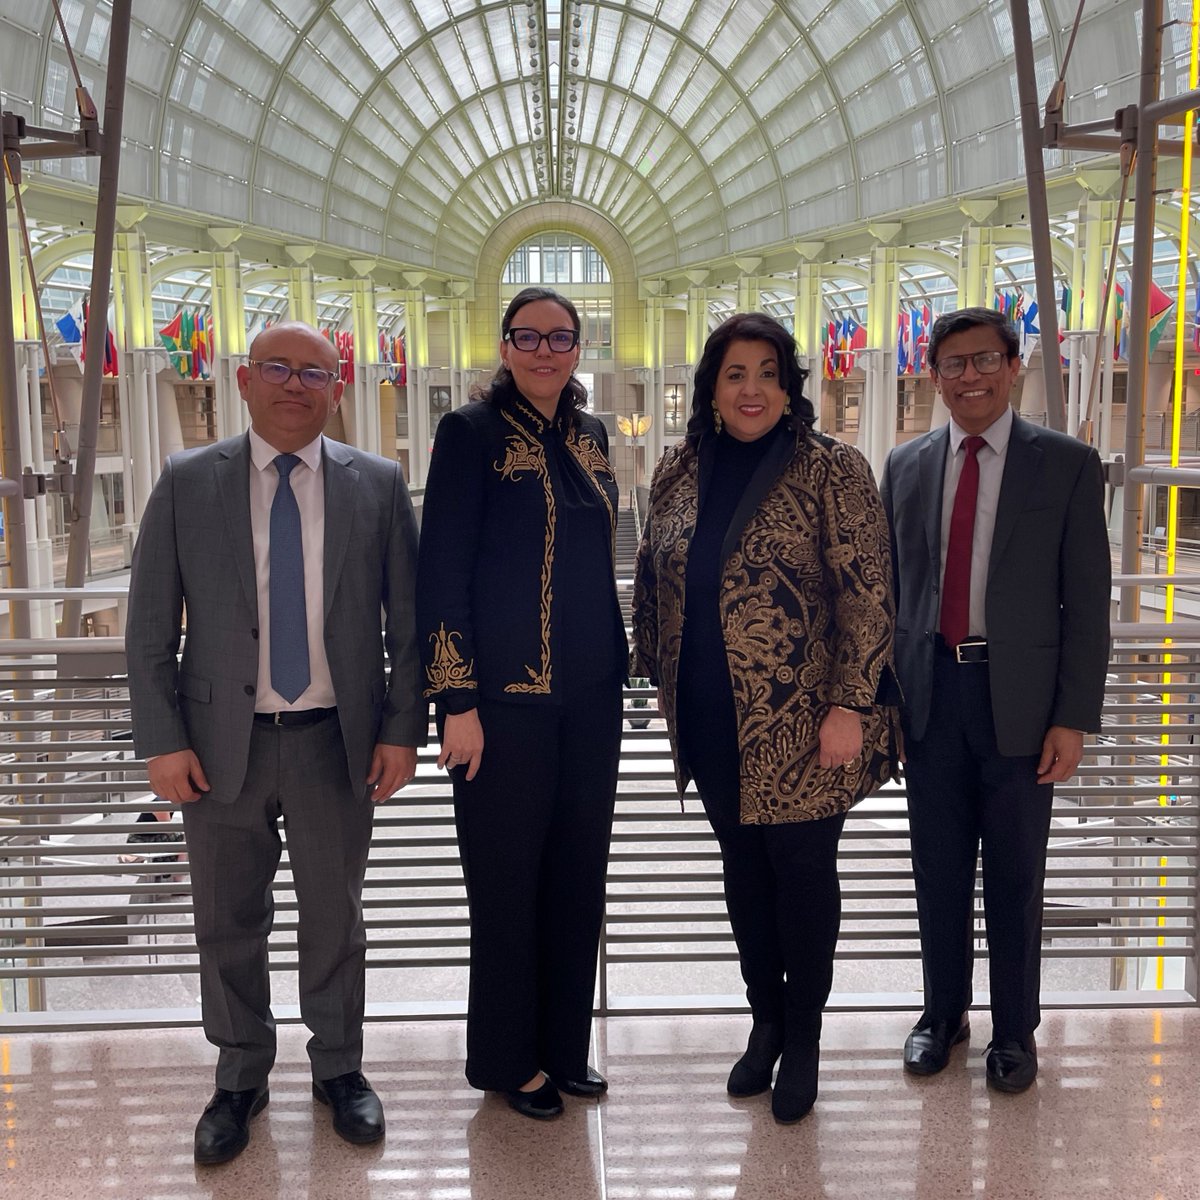 It was a delight to welcome back the Ambassador of Tunisia, H.E. @BessassiTajouri last week. As we explore avenues to strengthen our ties, we look forward to a future of fruitful partnerships that bridge cultures and enhance global trade relations. #WTCDC #WhereNationsConnect